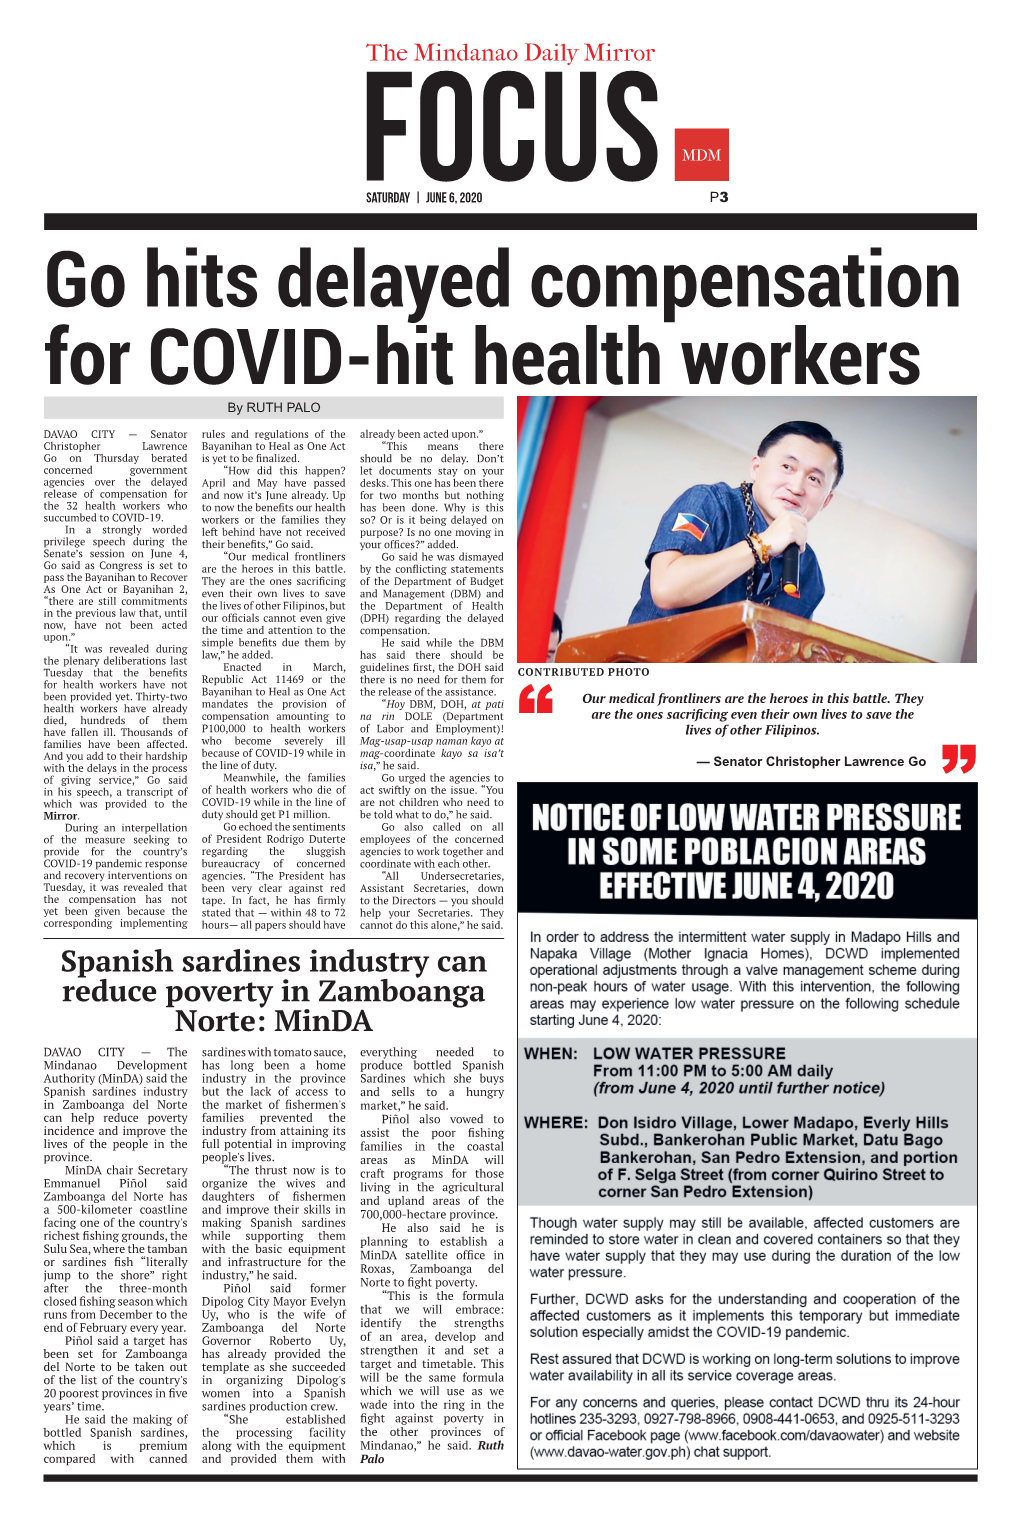 Go Hits Delayed Compensation for COVID-Hit Health Workers by RUTH PALO